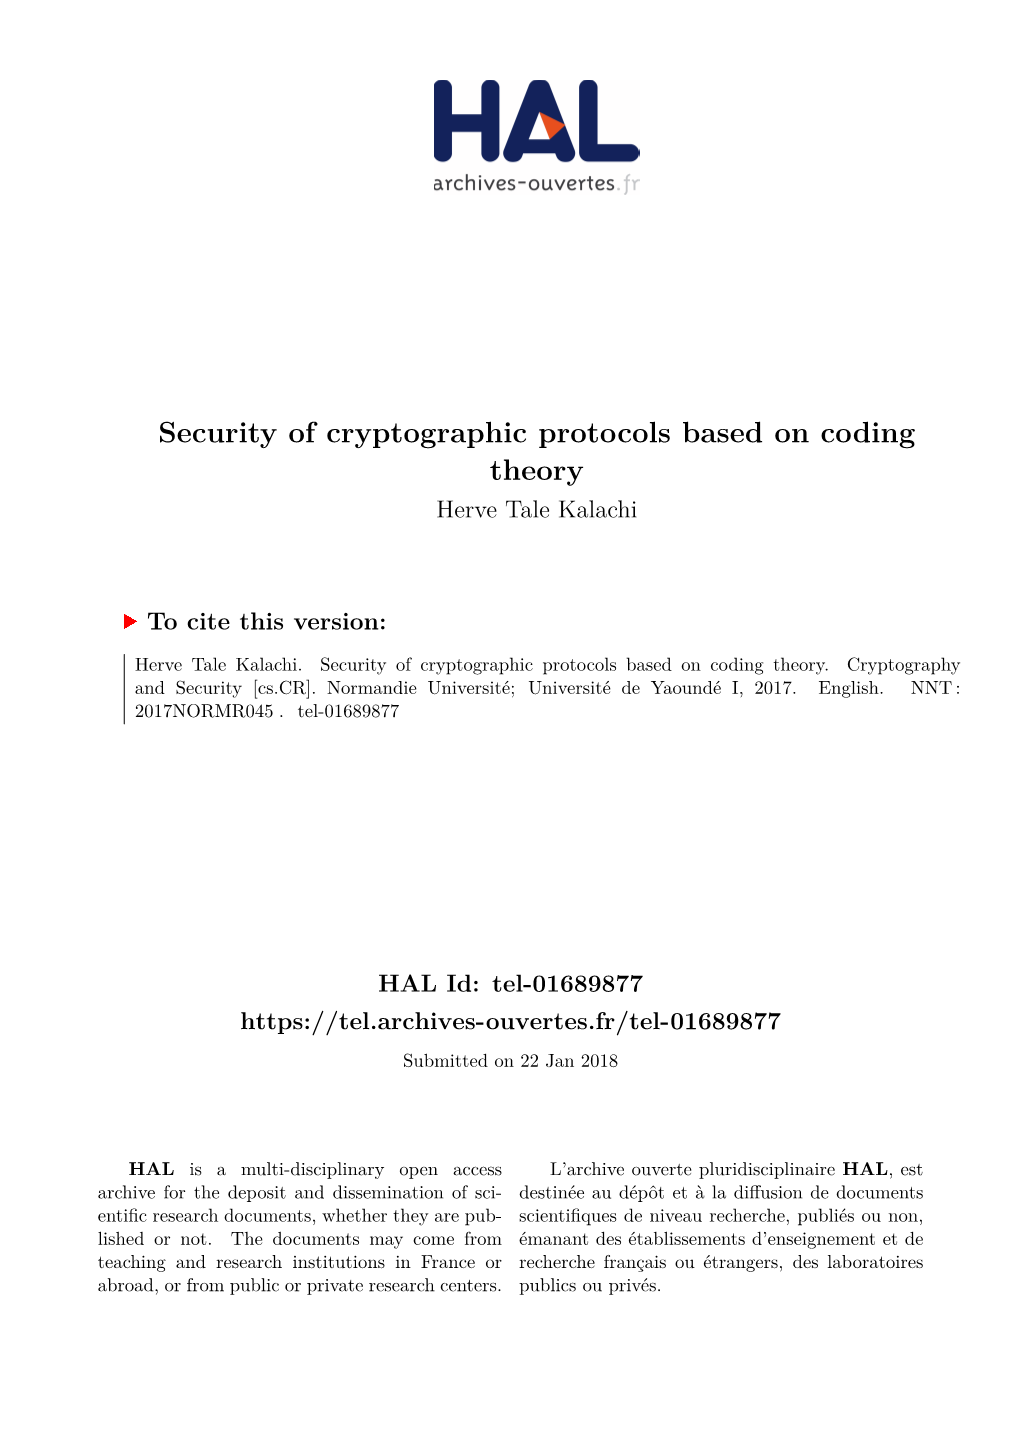 Security of Cryptographic Protocols Based on Coding Theory Herve Tale Kalachi